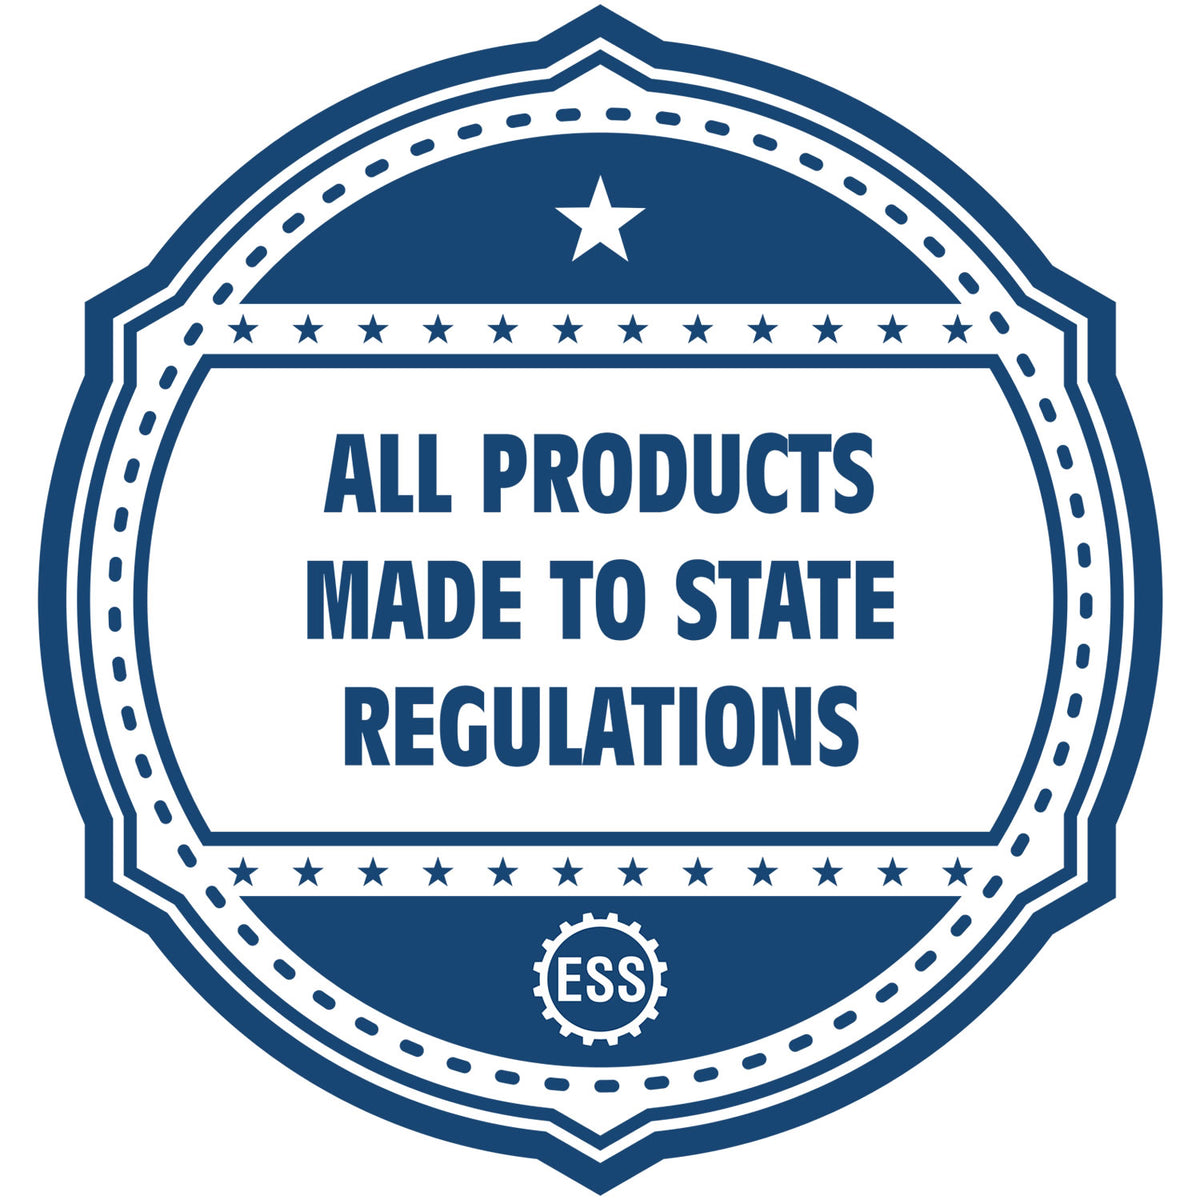 An icon or badge element for the Self-Inking State Seal Alaska Notary Stamp showing that this product is made in compliance with state regulations.